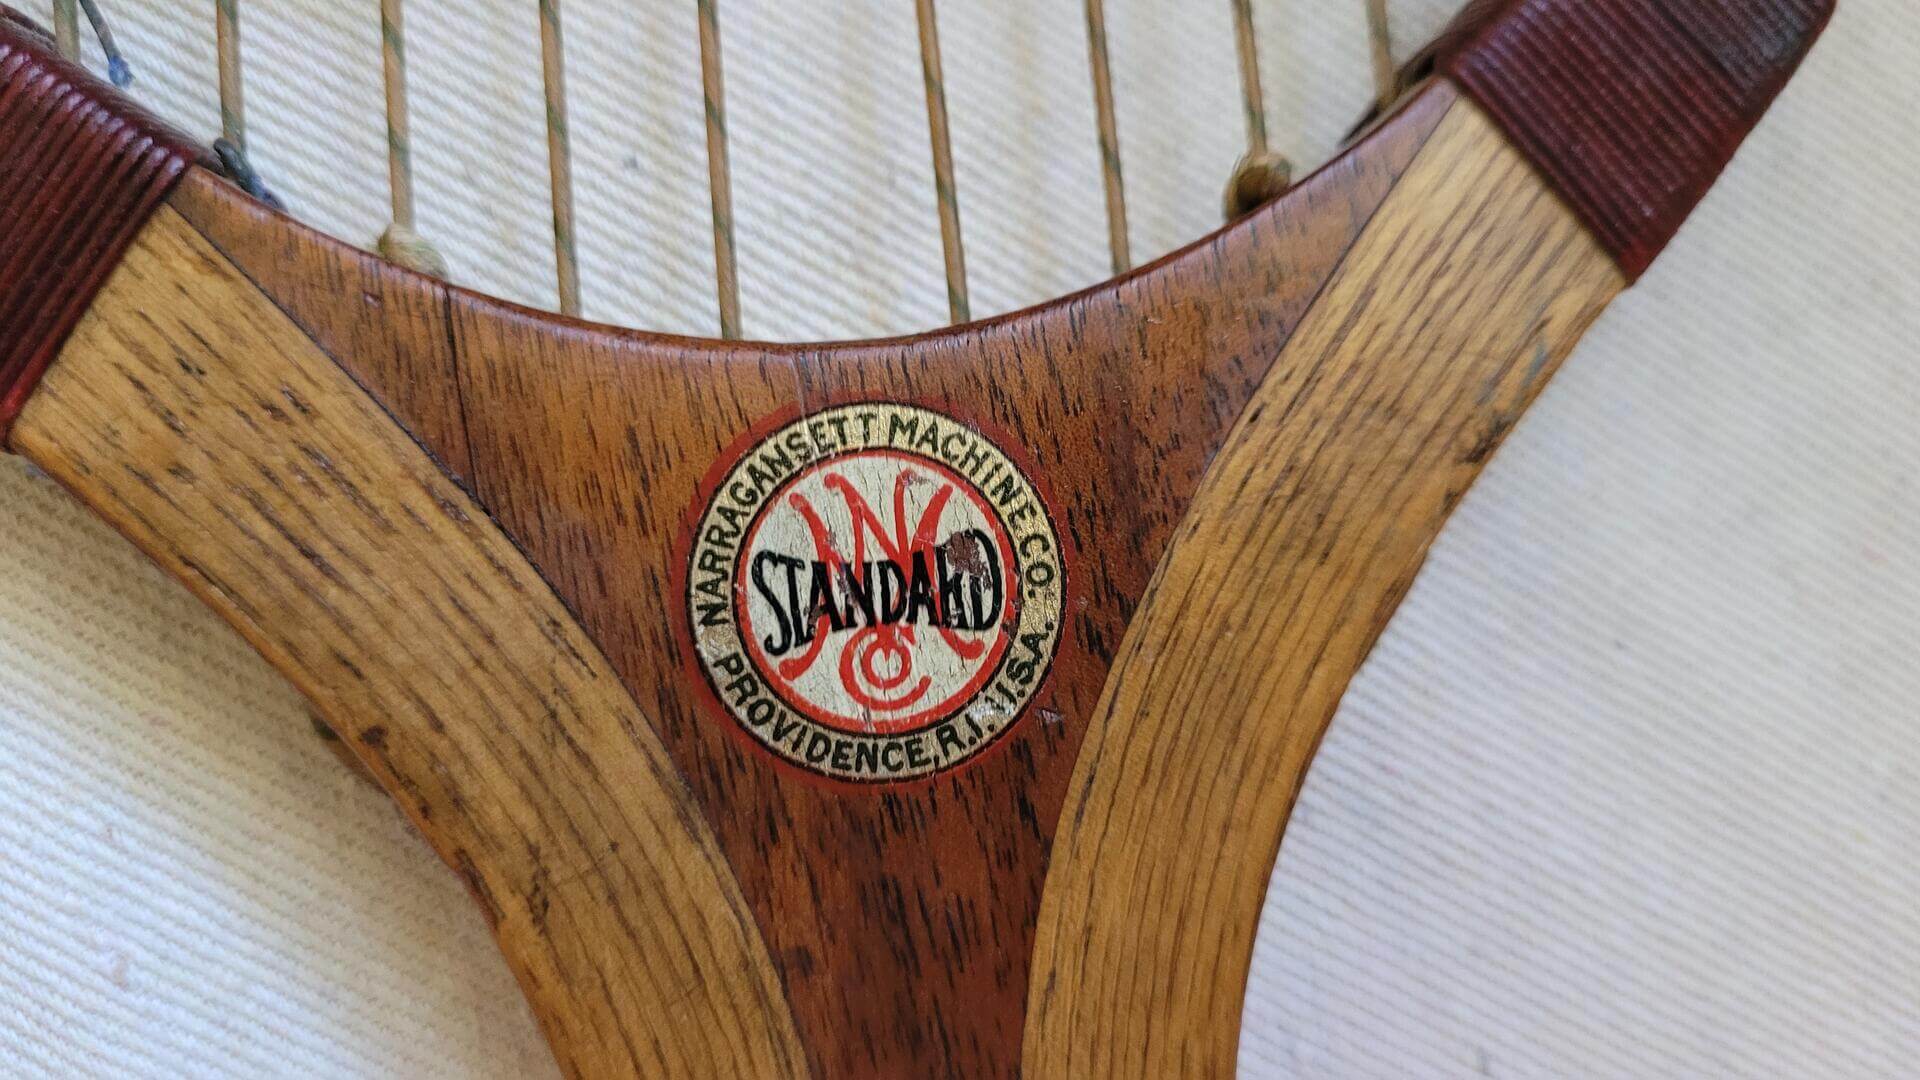 Rare Narrangansett Machine Co Antique Wooden Tennis Racquet Stanford Model manufactured in Providence Rhode Island factory - Vintage made in USA racquet sports equipment and memorabilia collectible